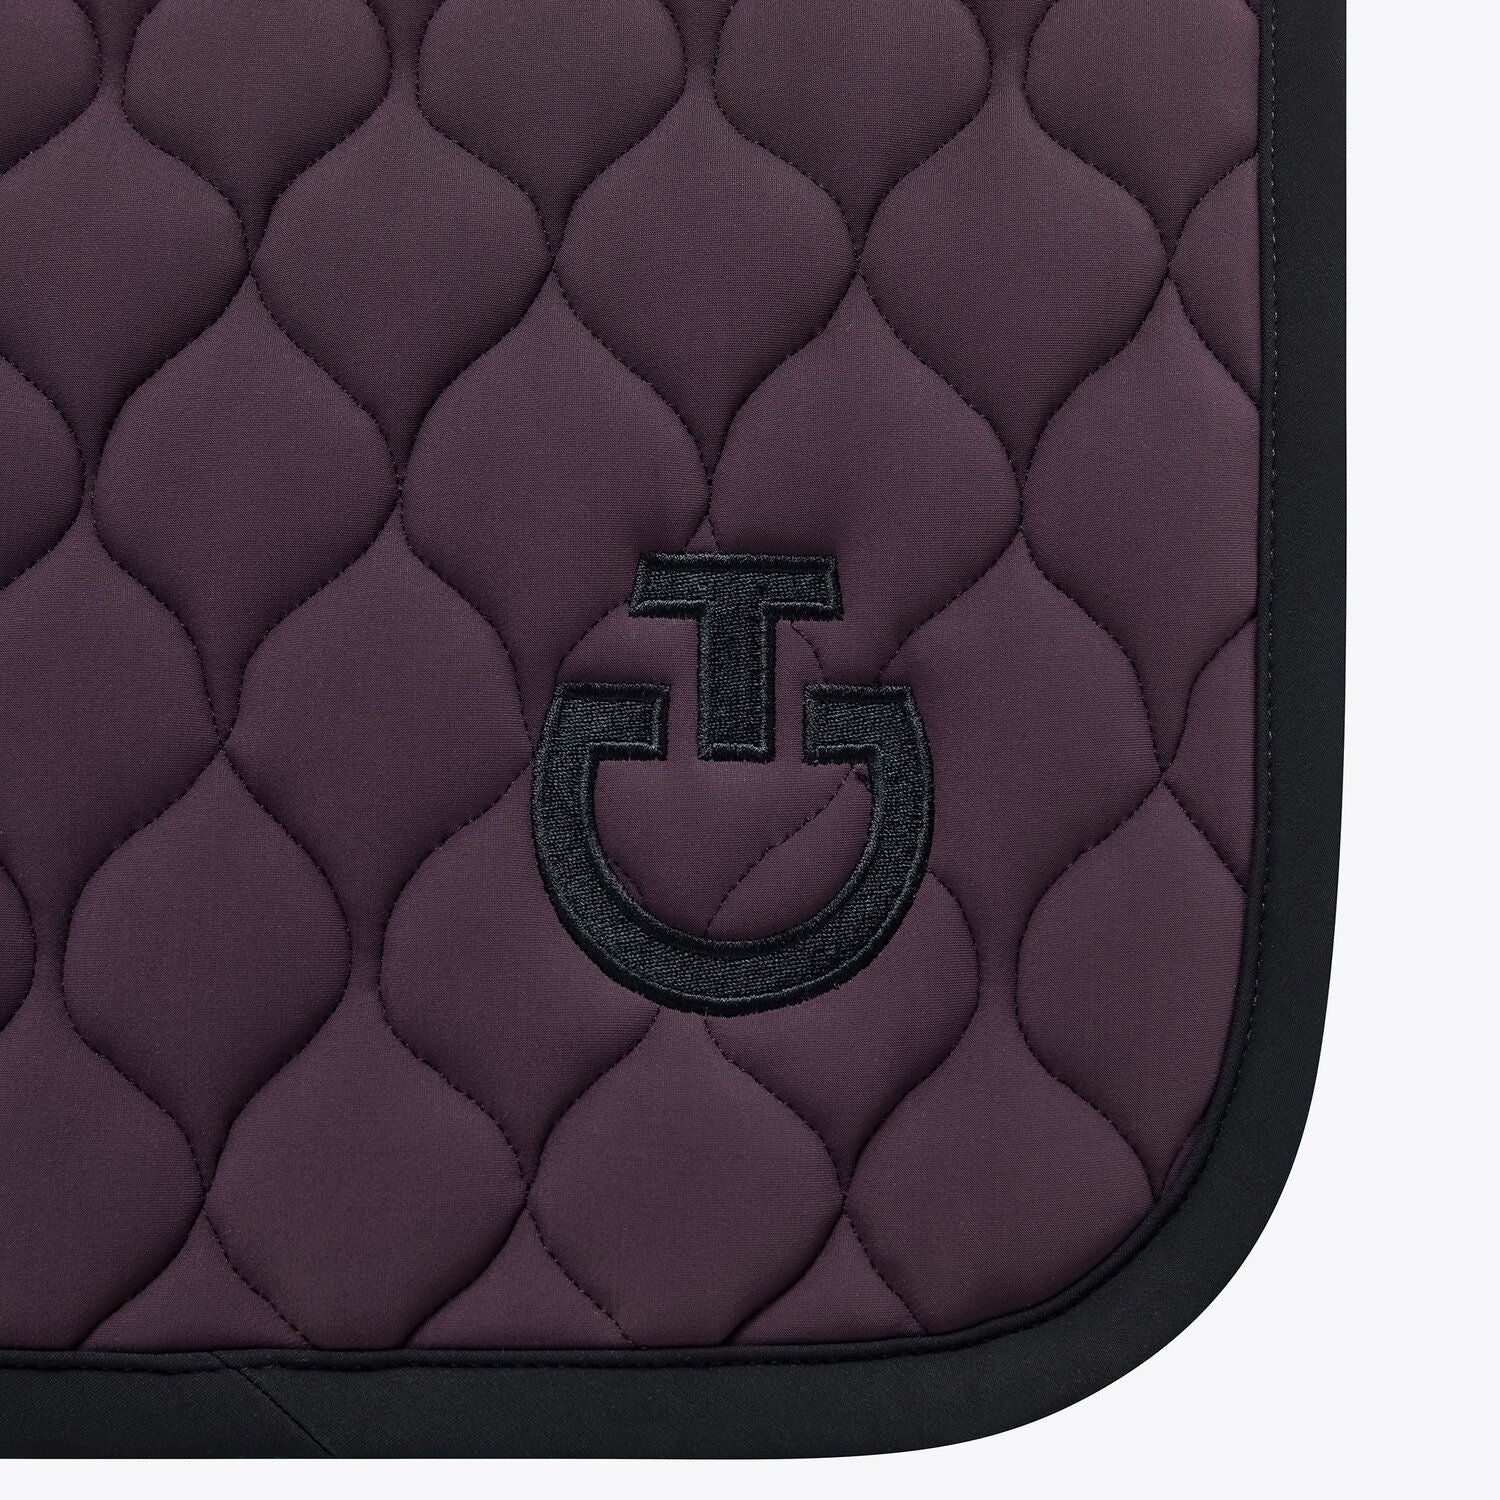 The Cavalleria Toscana dark purple saddle pad is cut for an anatomic fit to ensure the comfort of your horse, and security over every obstacle on the course. The outer face in performance fabric is lined with a thin layer of padding and breathable, antibacterial waffle-texture cotton fabric. 